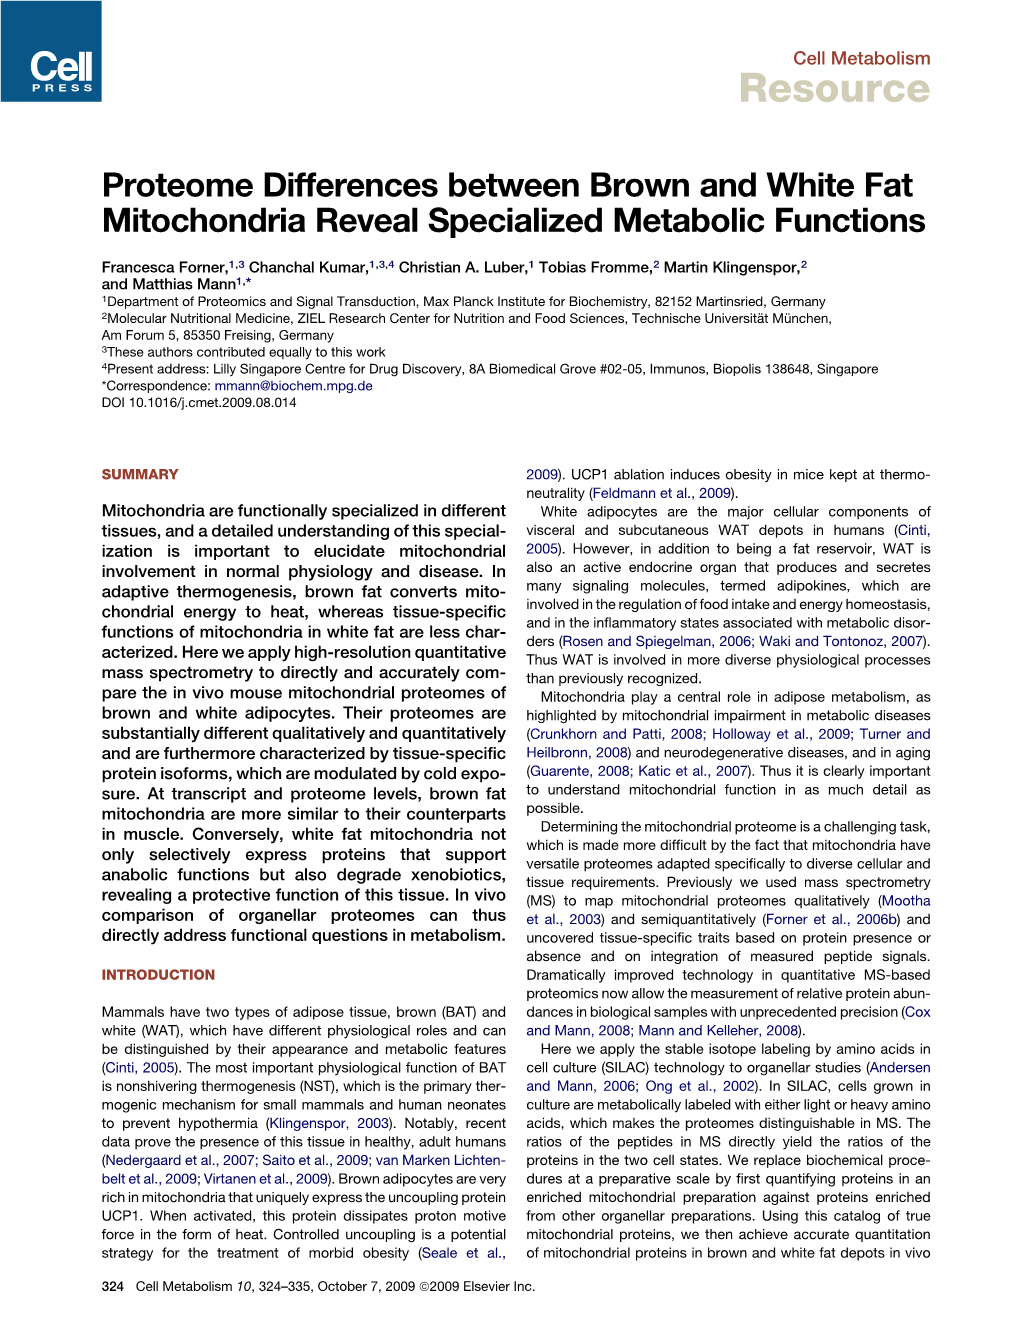 Proteome Differences Between Brown and White Fat Mitochondria Reveal Specialized Metabolic Functions